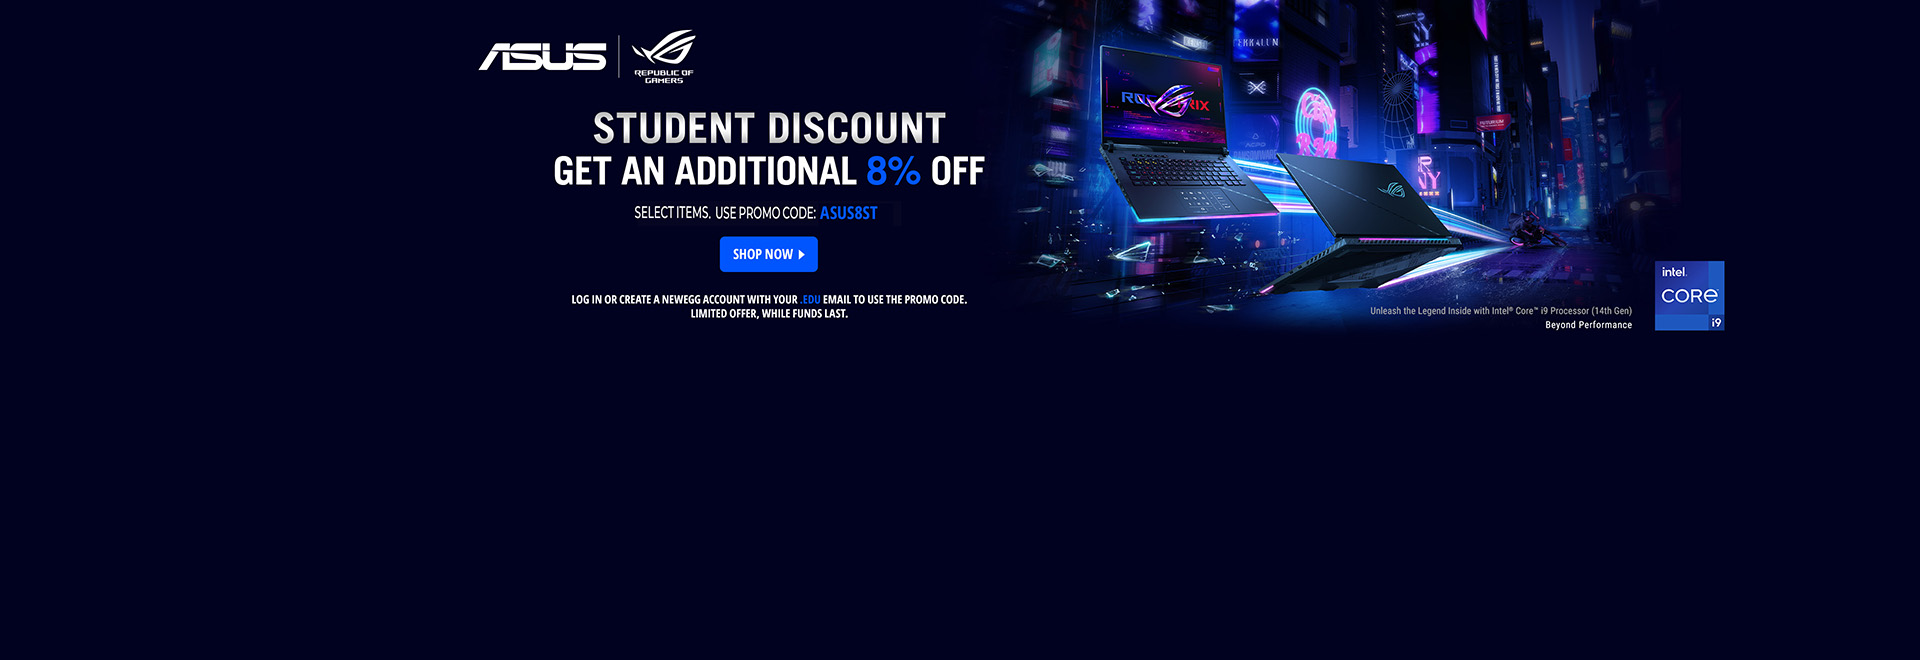  Student discount get an additional 8% off